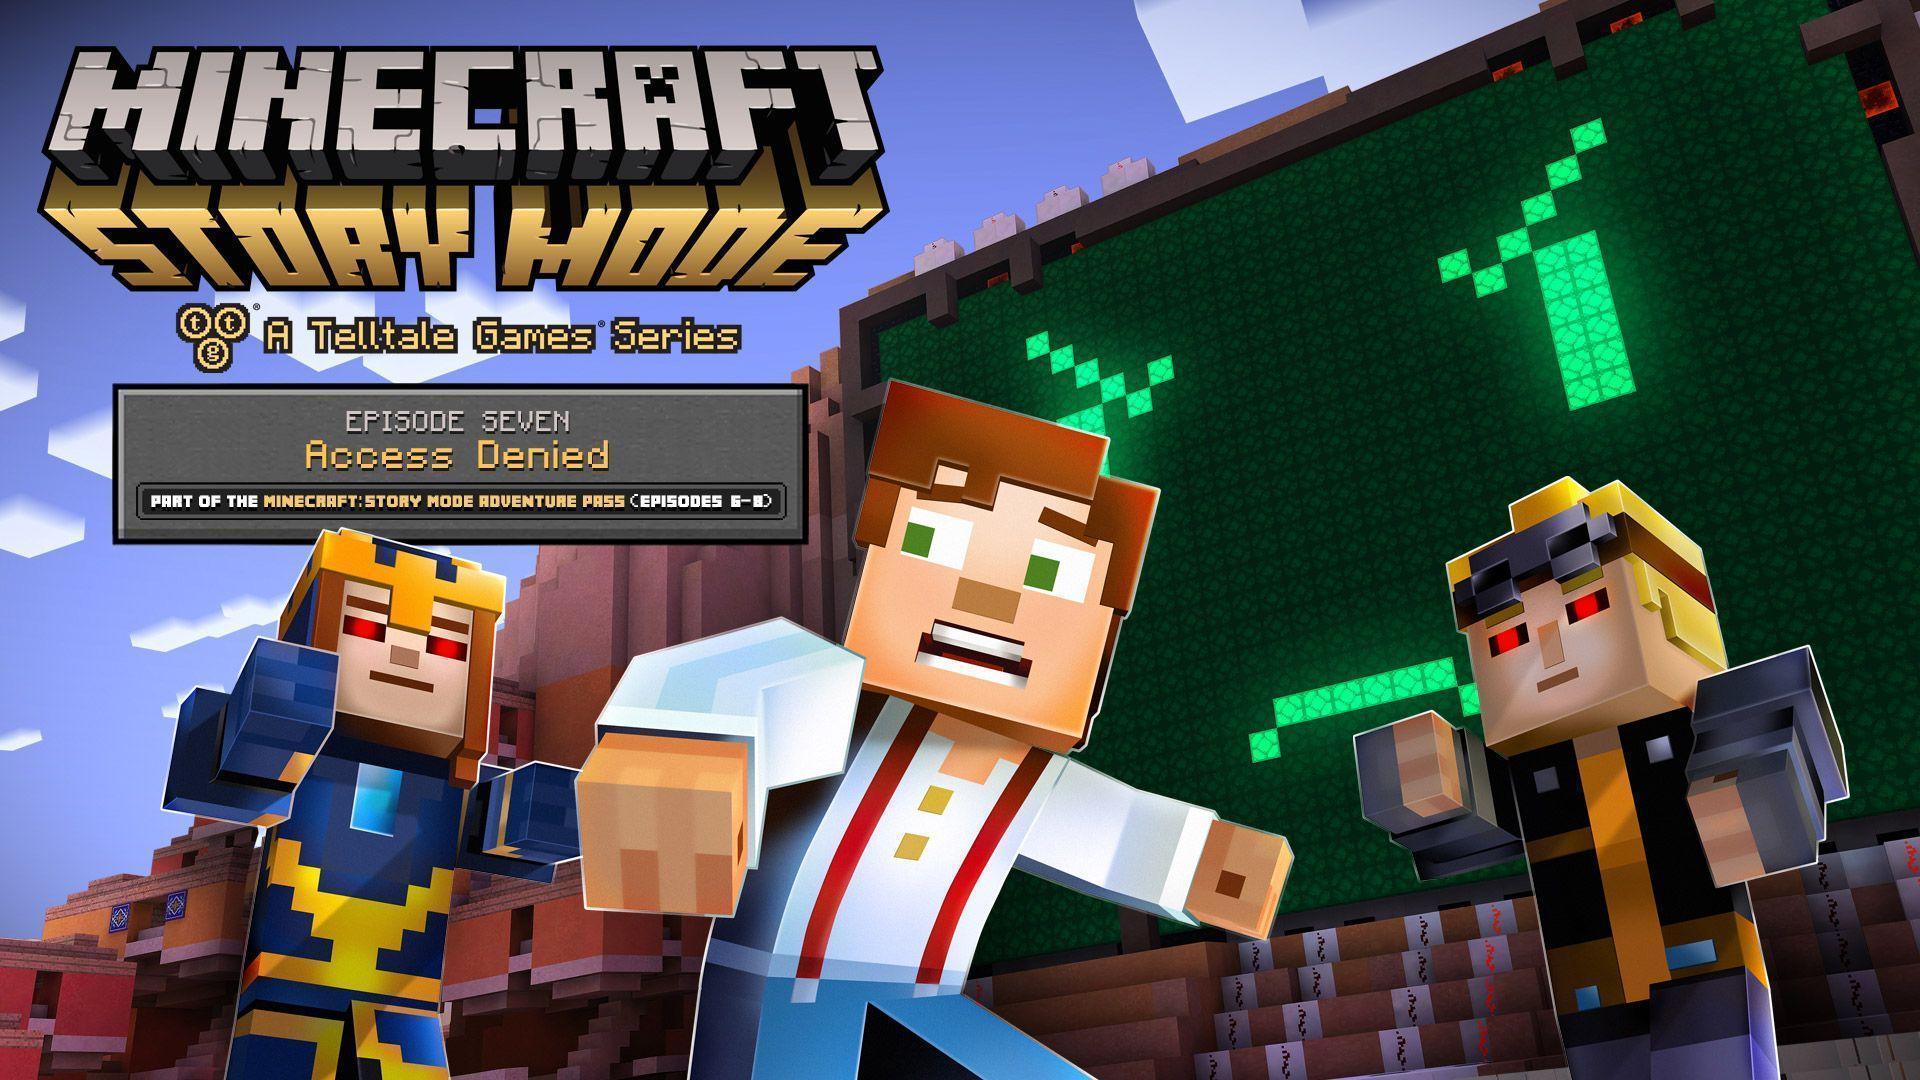 Minecraft: Story Mode Wallpaper in 1920x1080